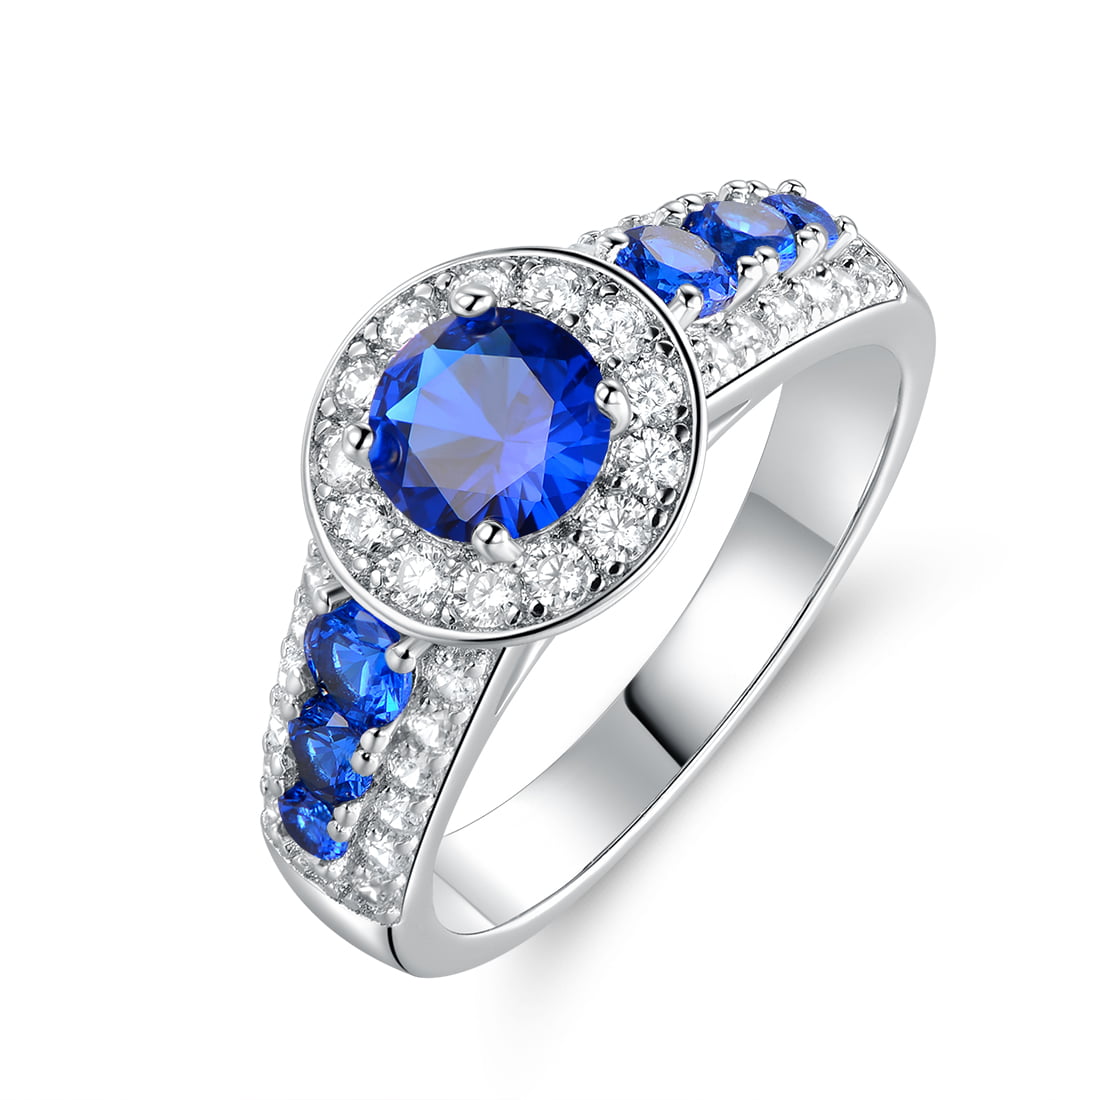 Peermont Round Cut Sapphire Ring with White Gold Overlay - Walmart.com